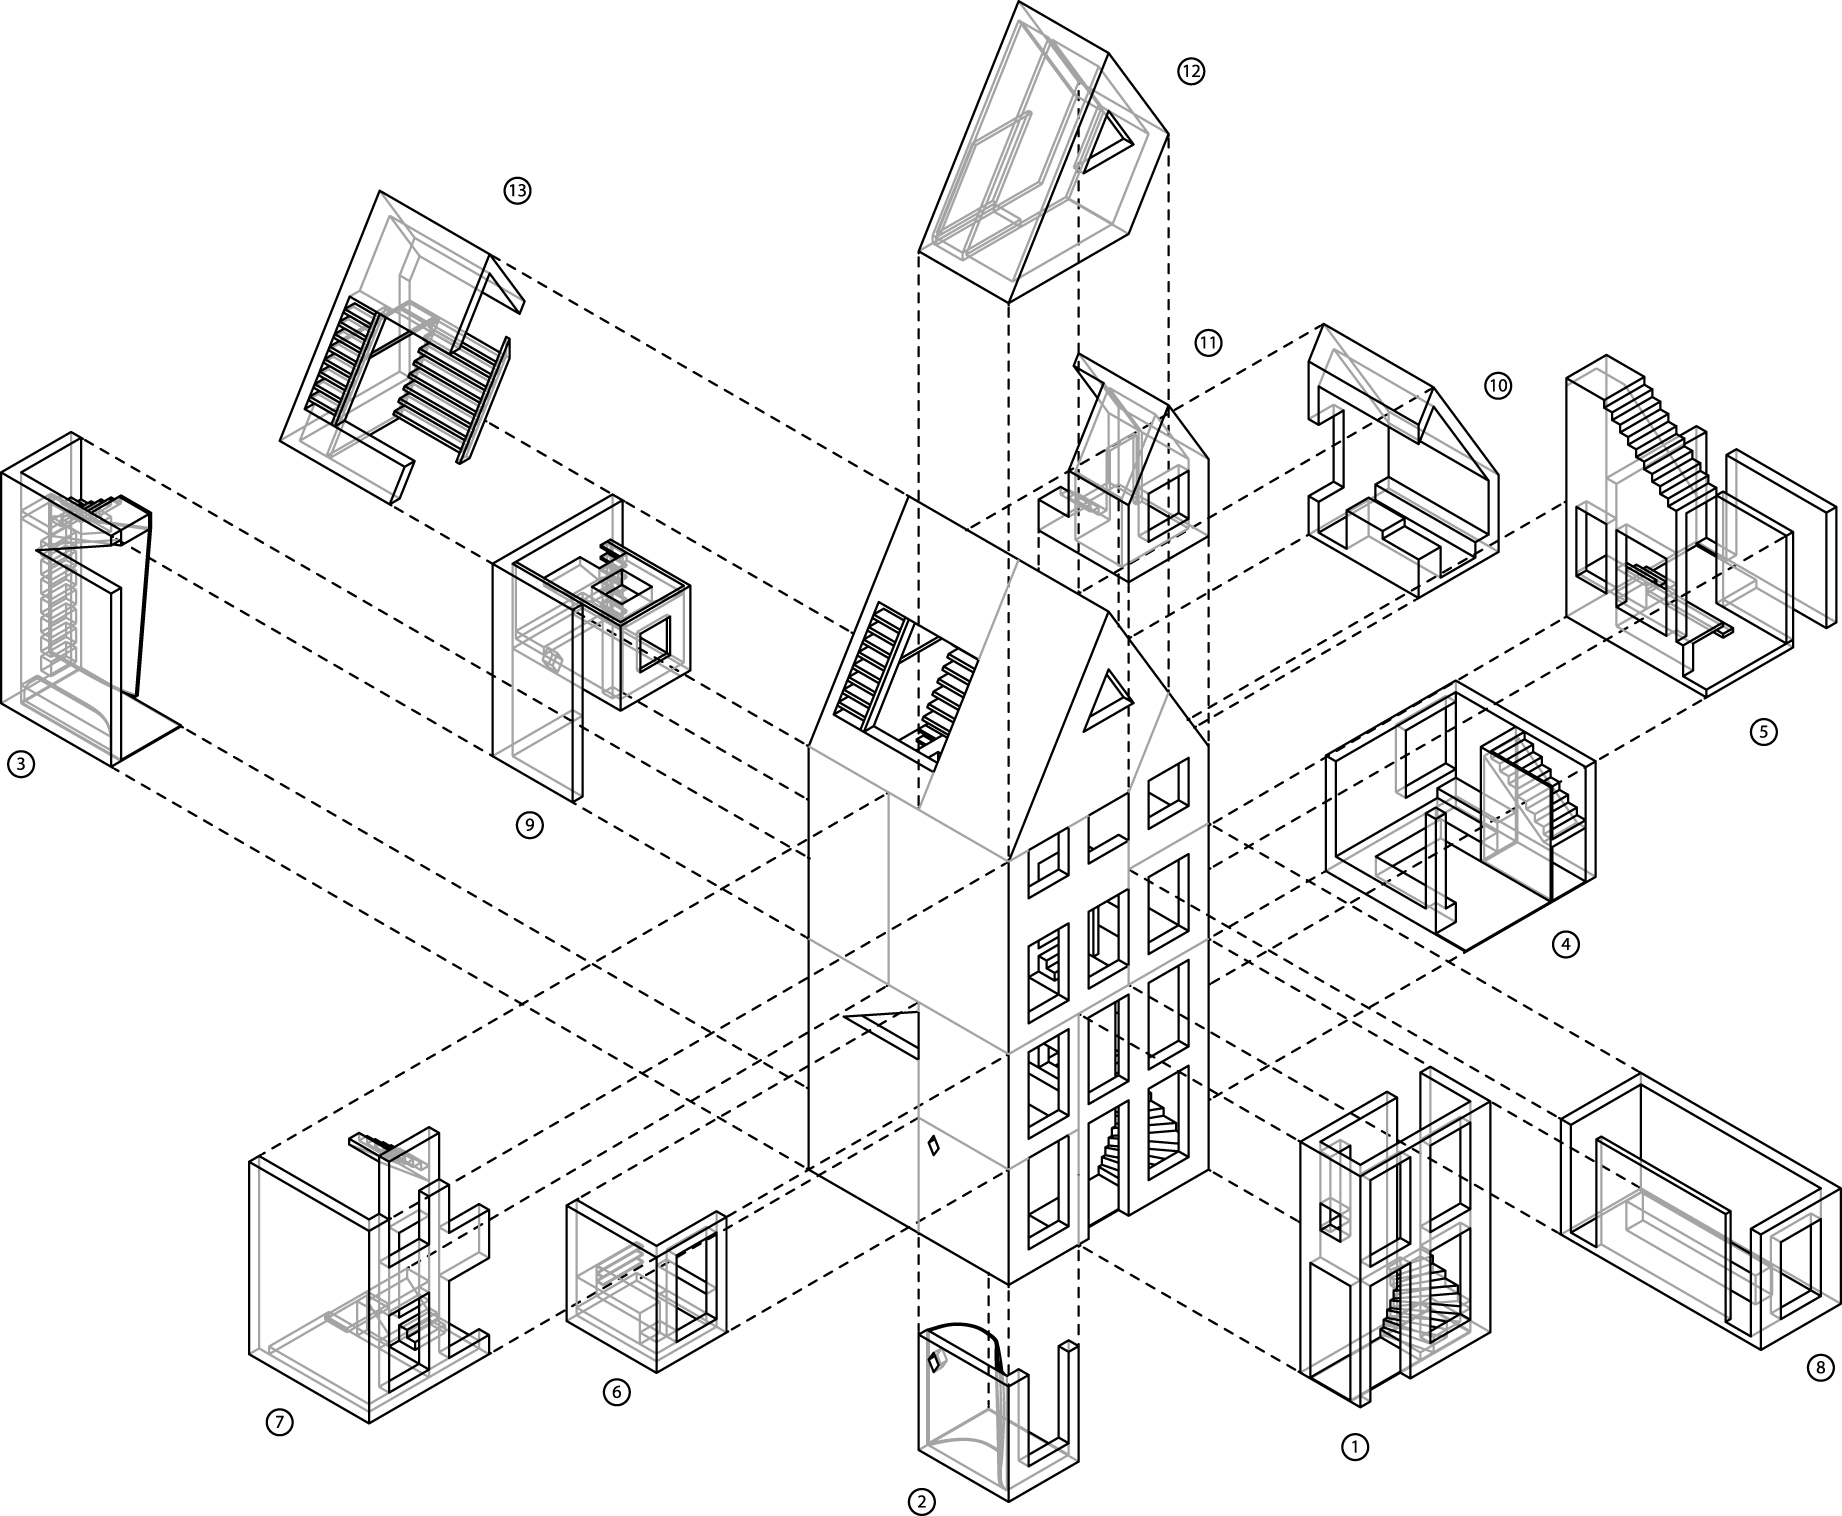 Axonometric view of the construction parts being printed by the KamerMaker (ba DUSarchitects).